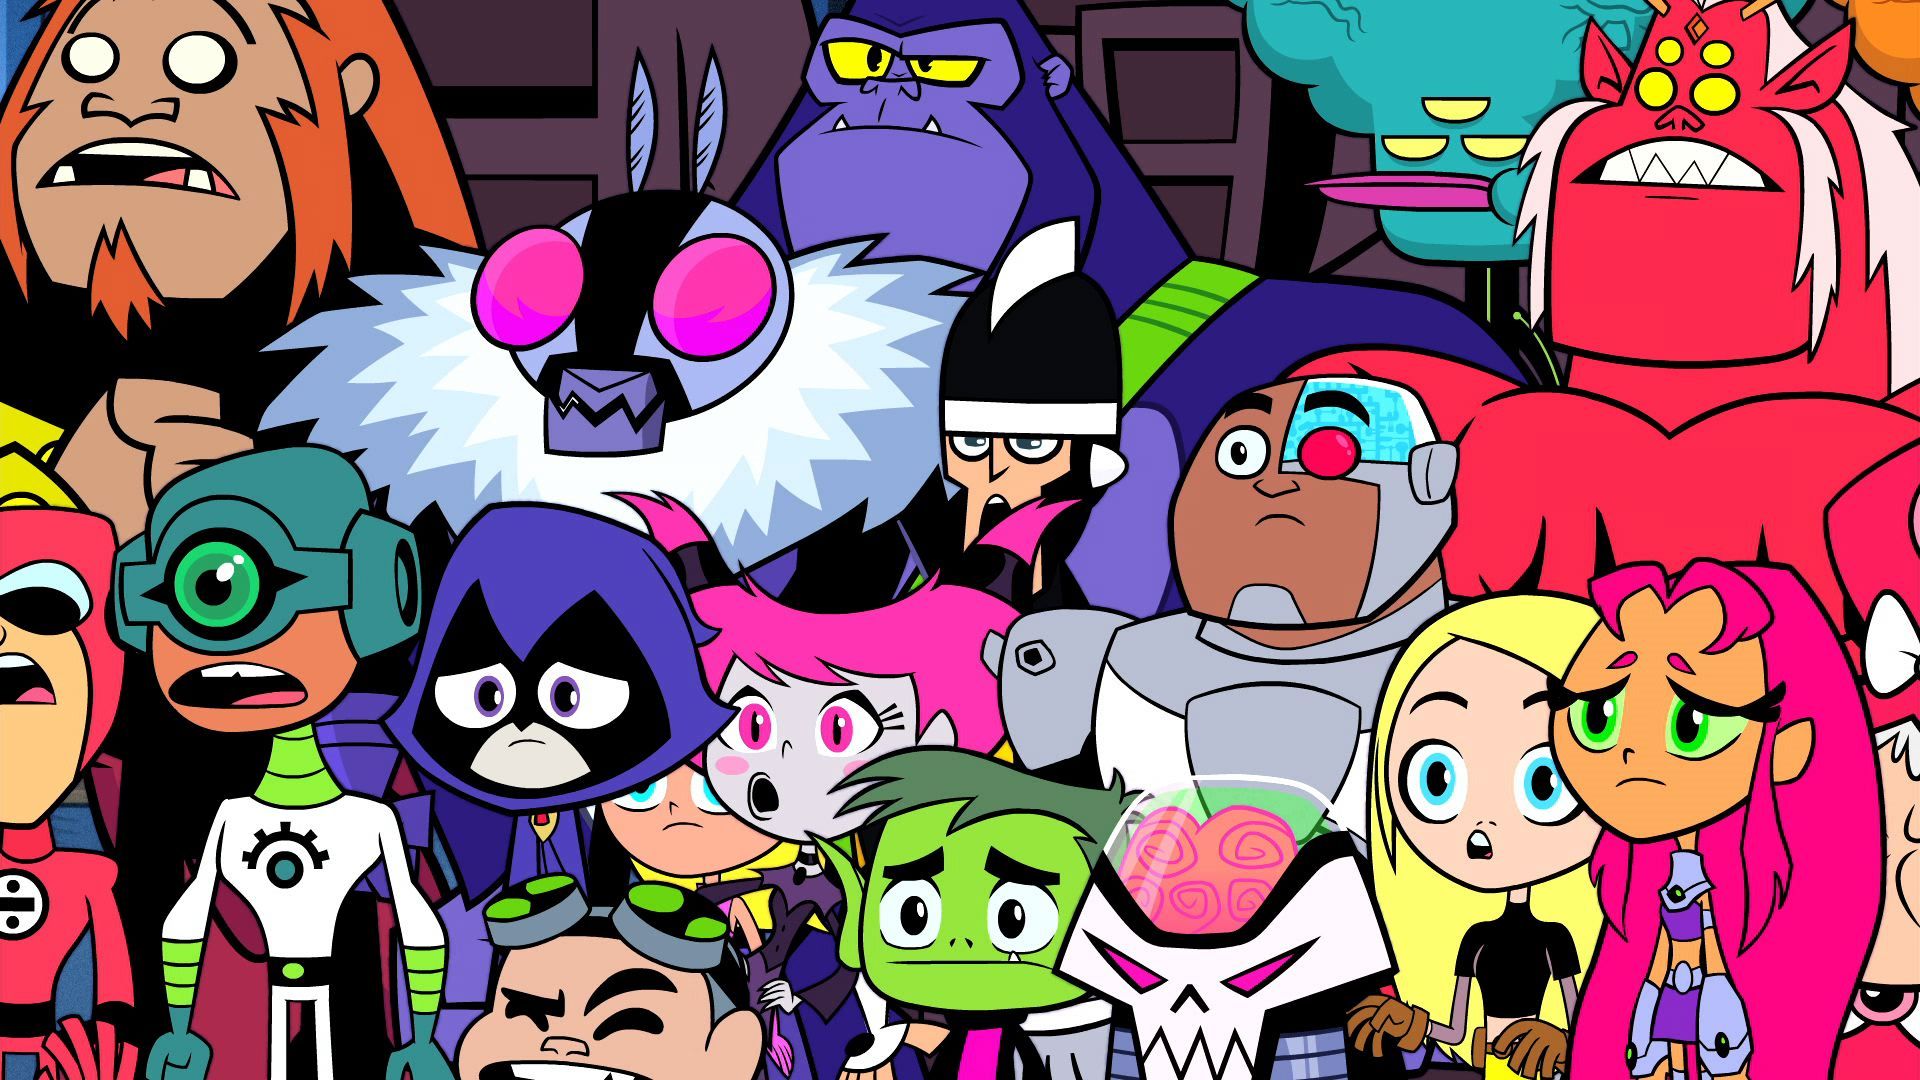 Teen Titans Go! - “I'm the Sauce” Clips and Image